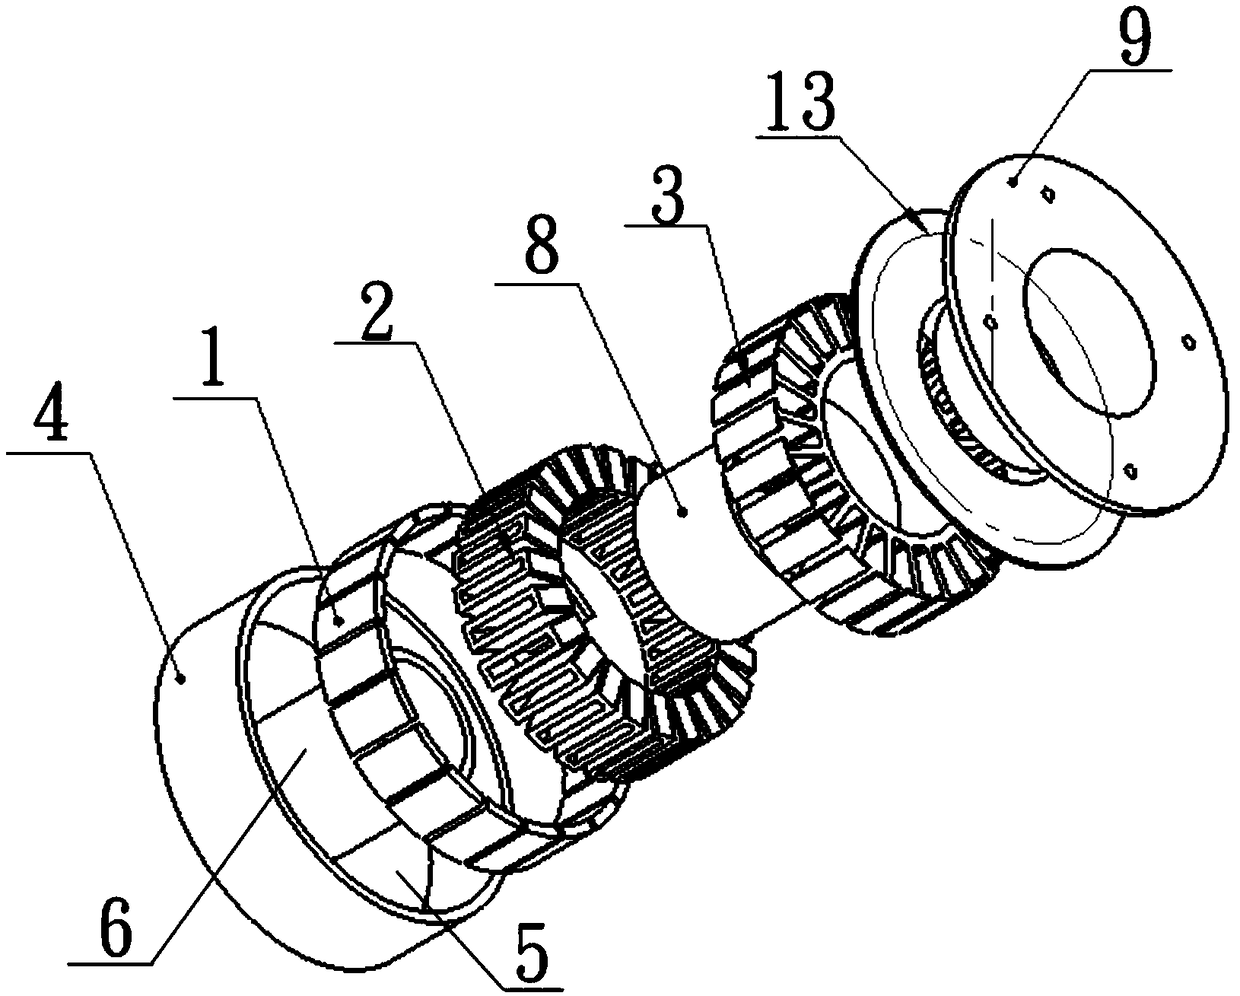 A brushless DC motor with hollow shaft